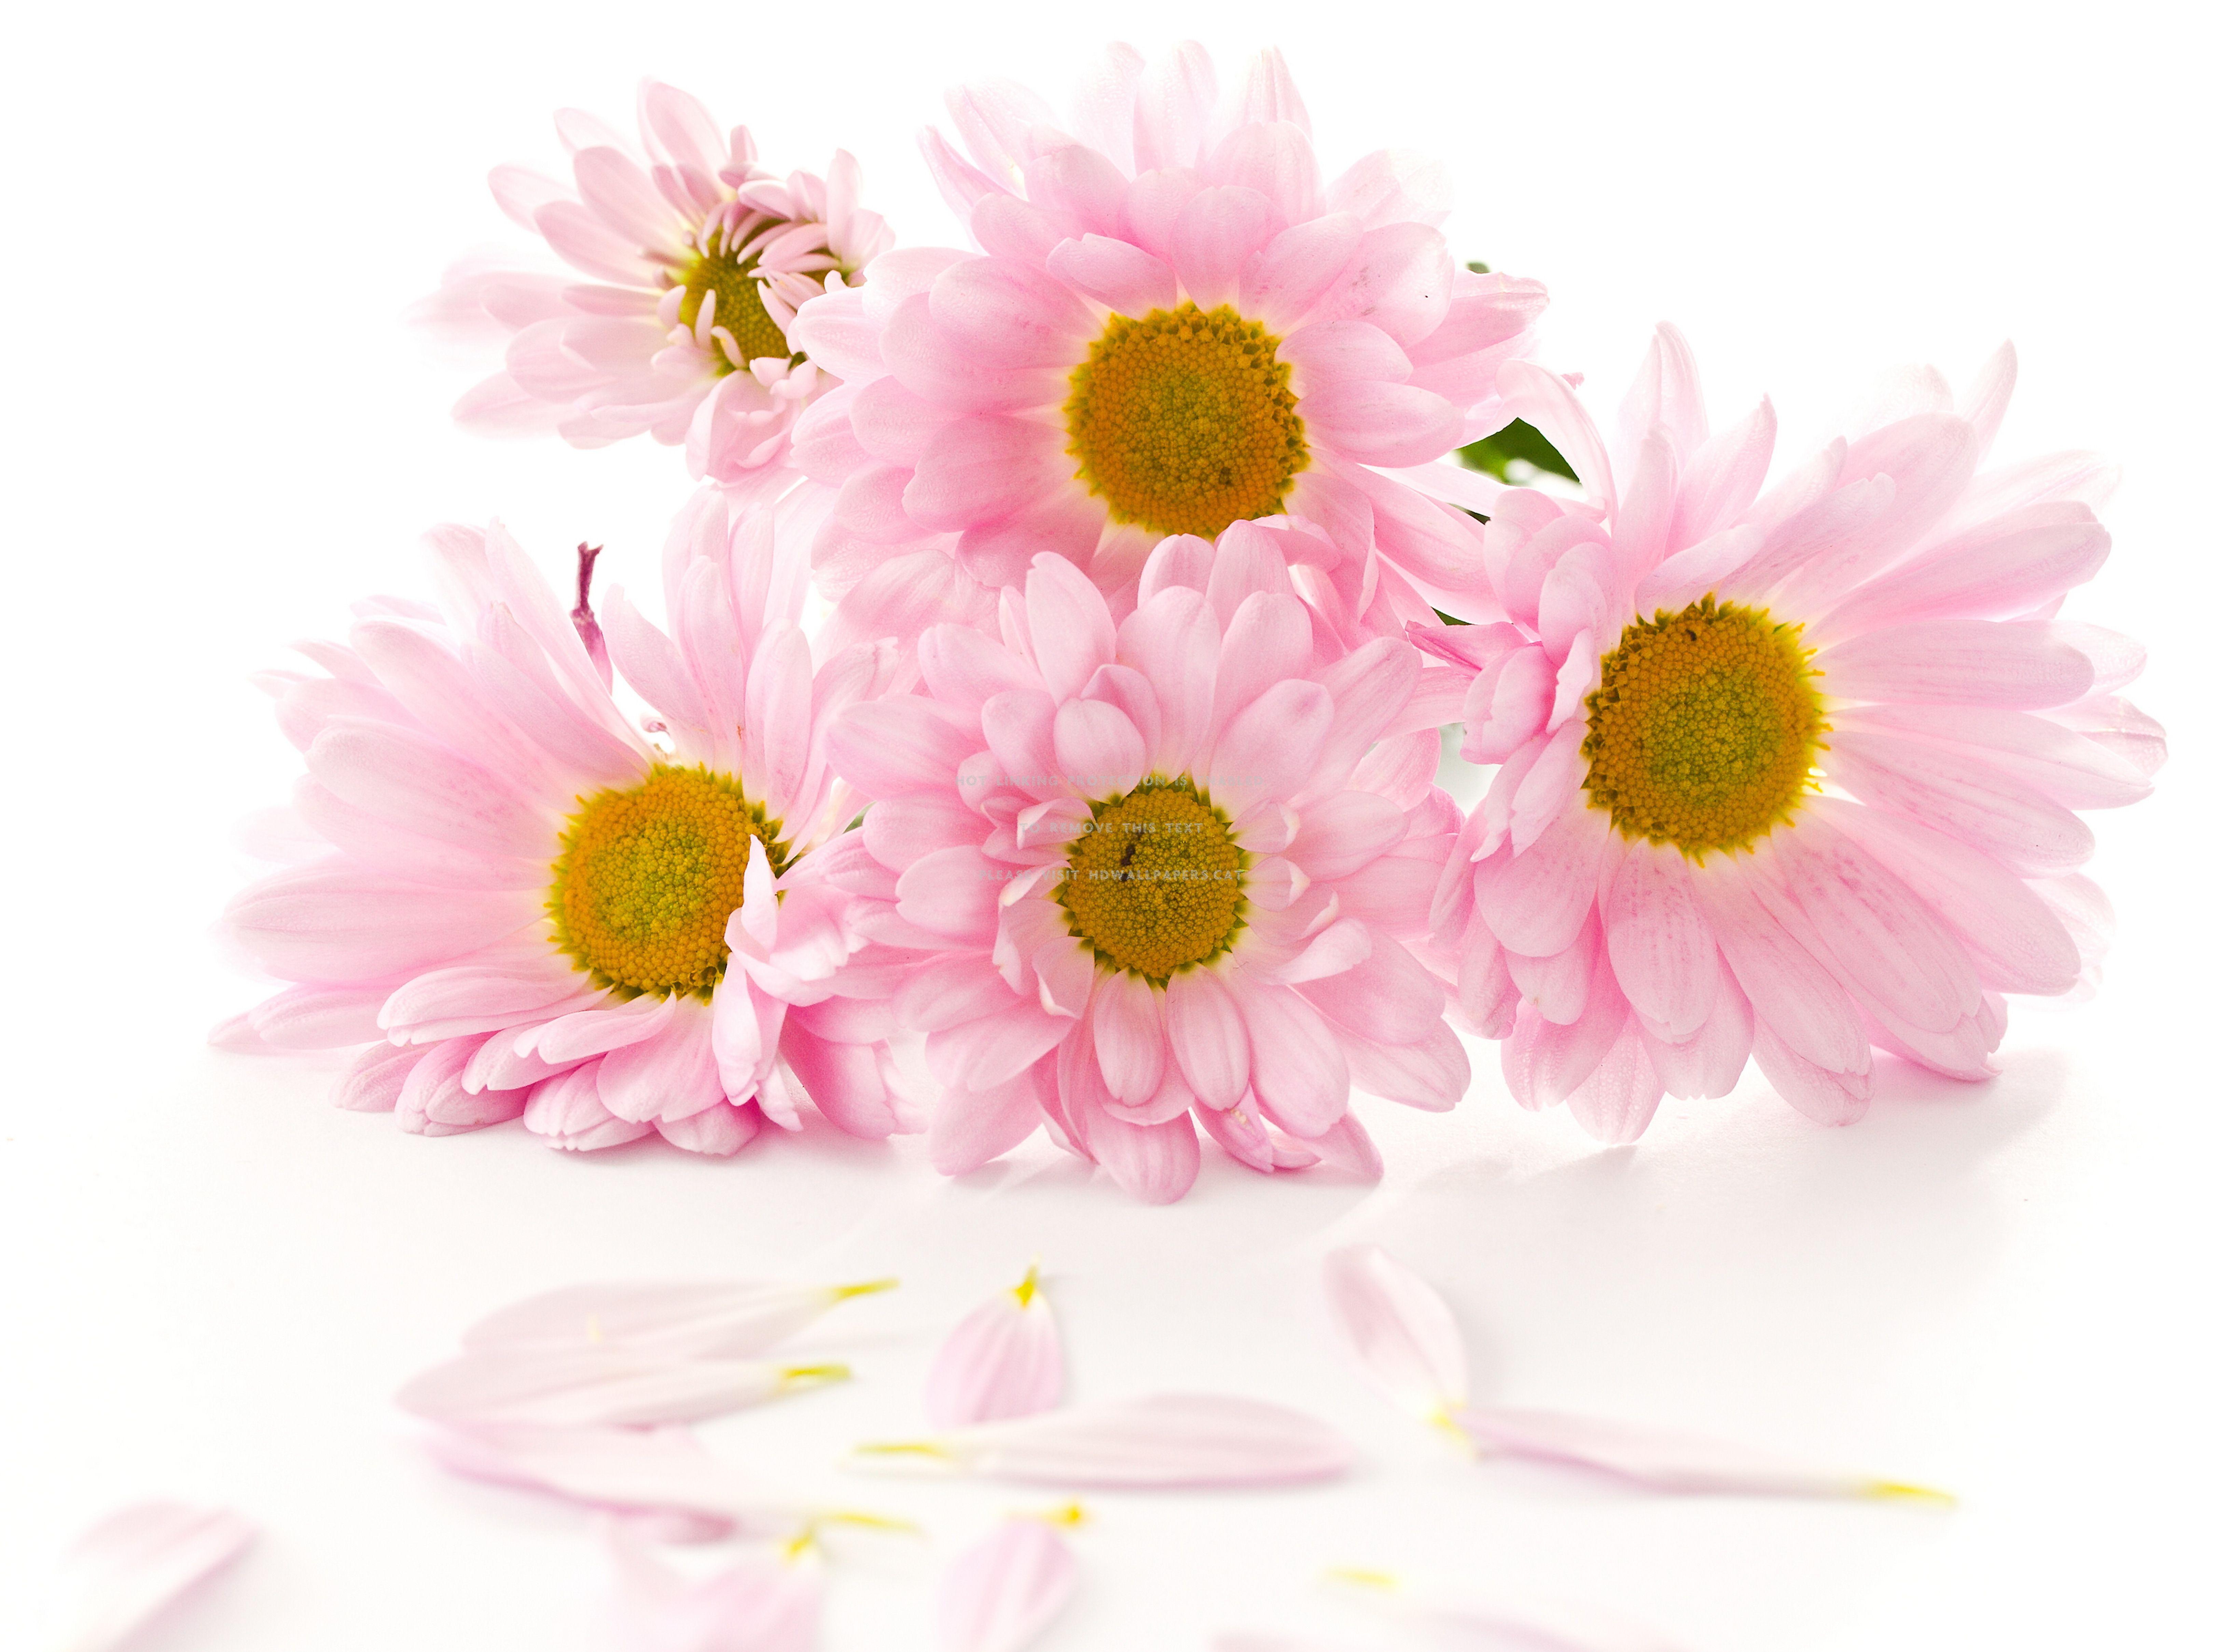 Pastel Flowers Hd Wallpapers Top Free Pastel Flowers Hd Backgrounds Wallpaperaccess 5111